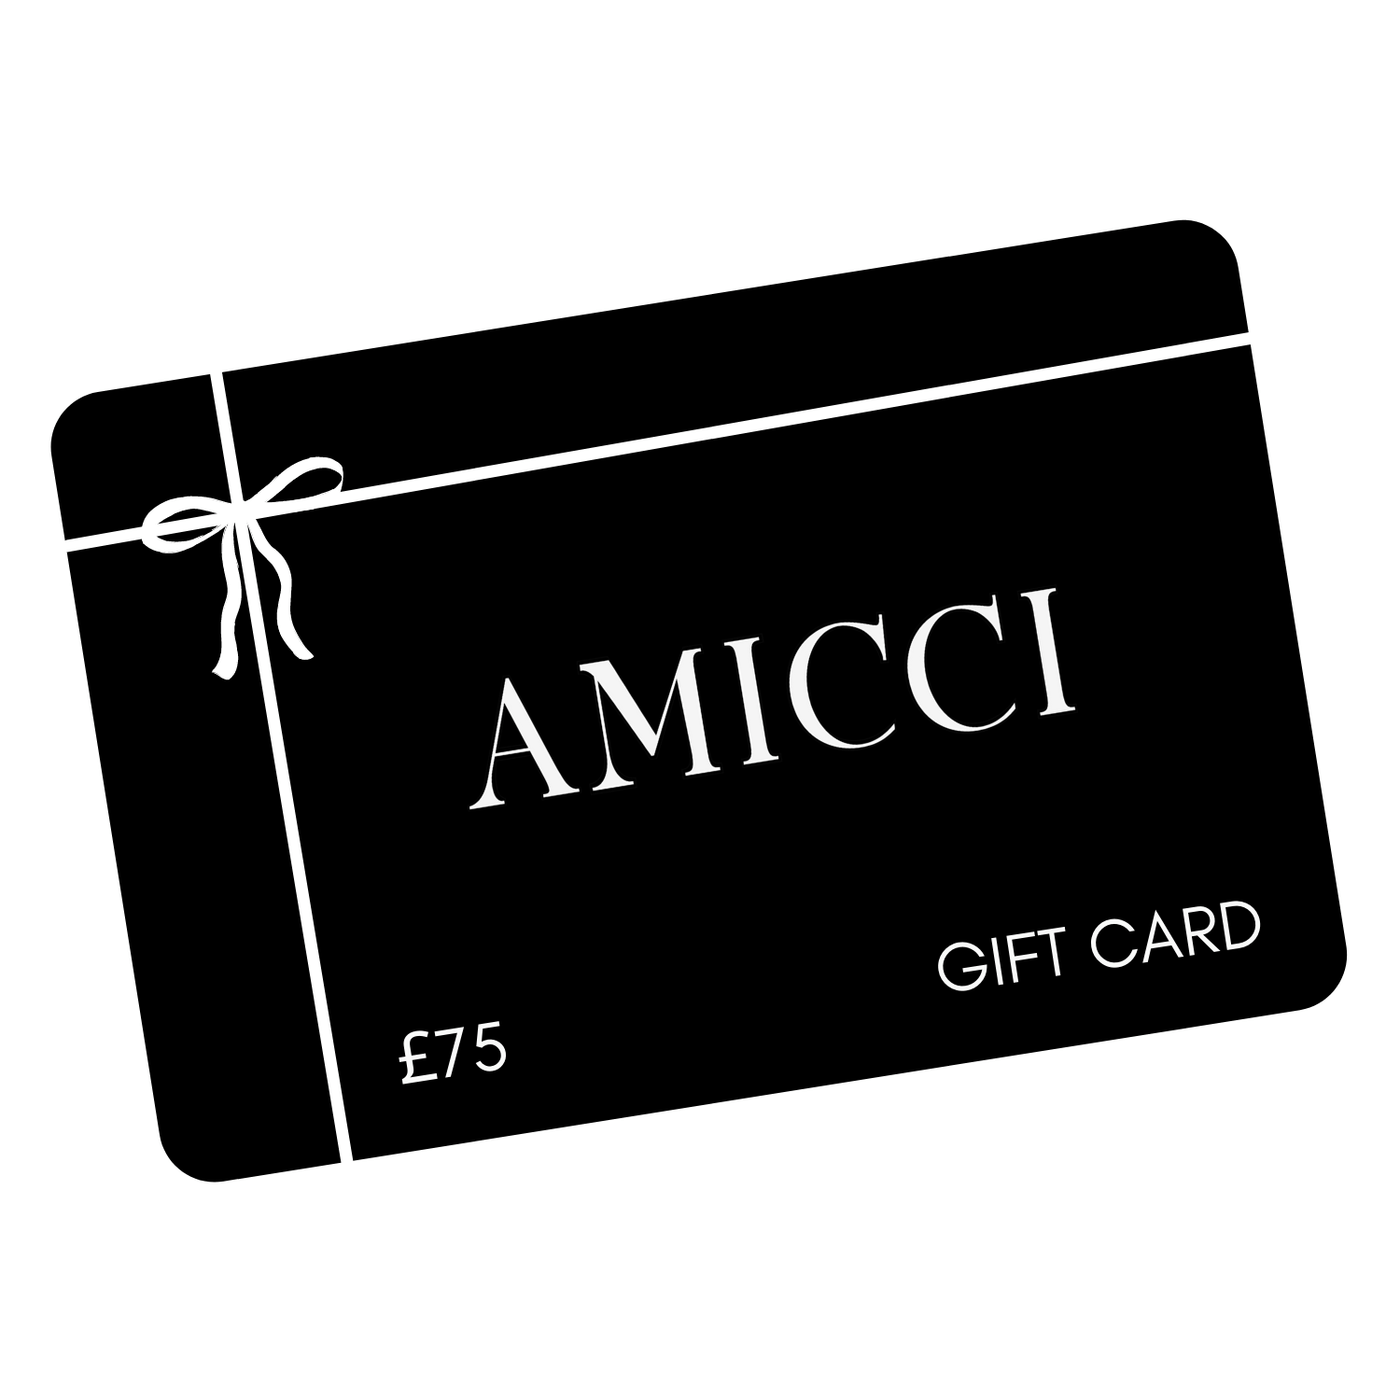 Amicci Gift cards £75.00 Gift Cards